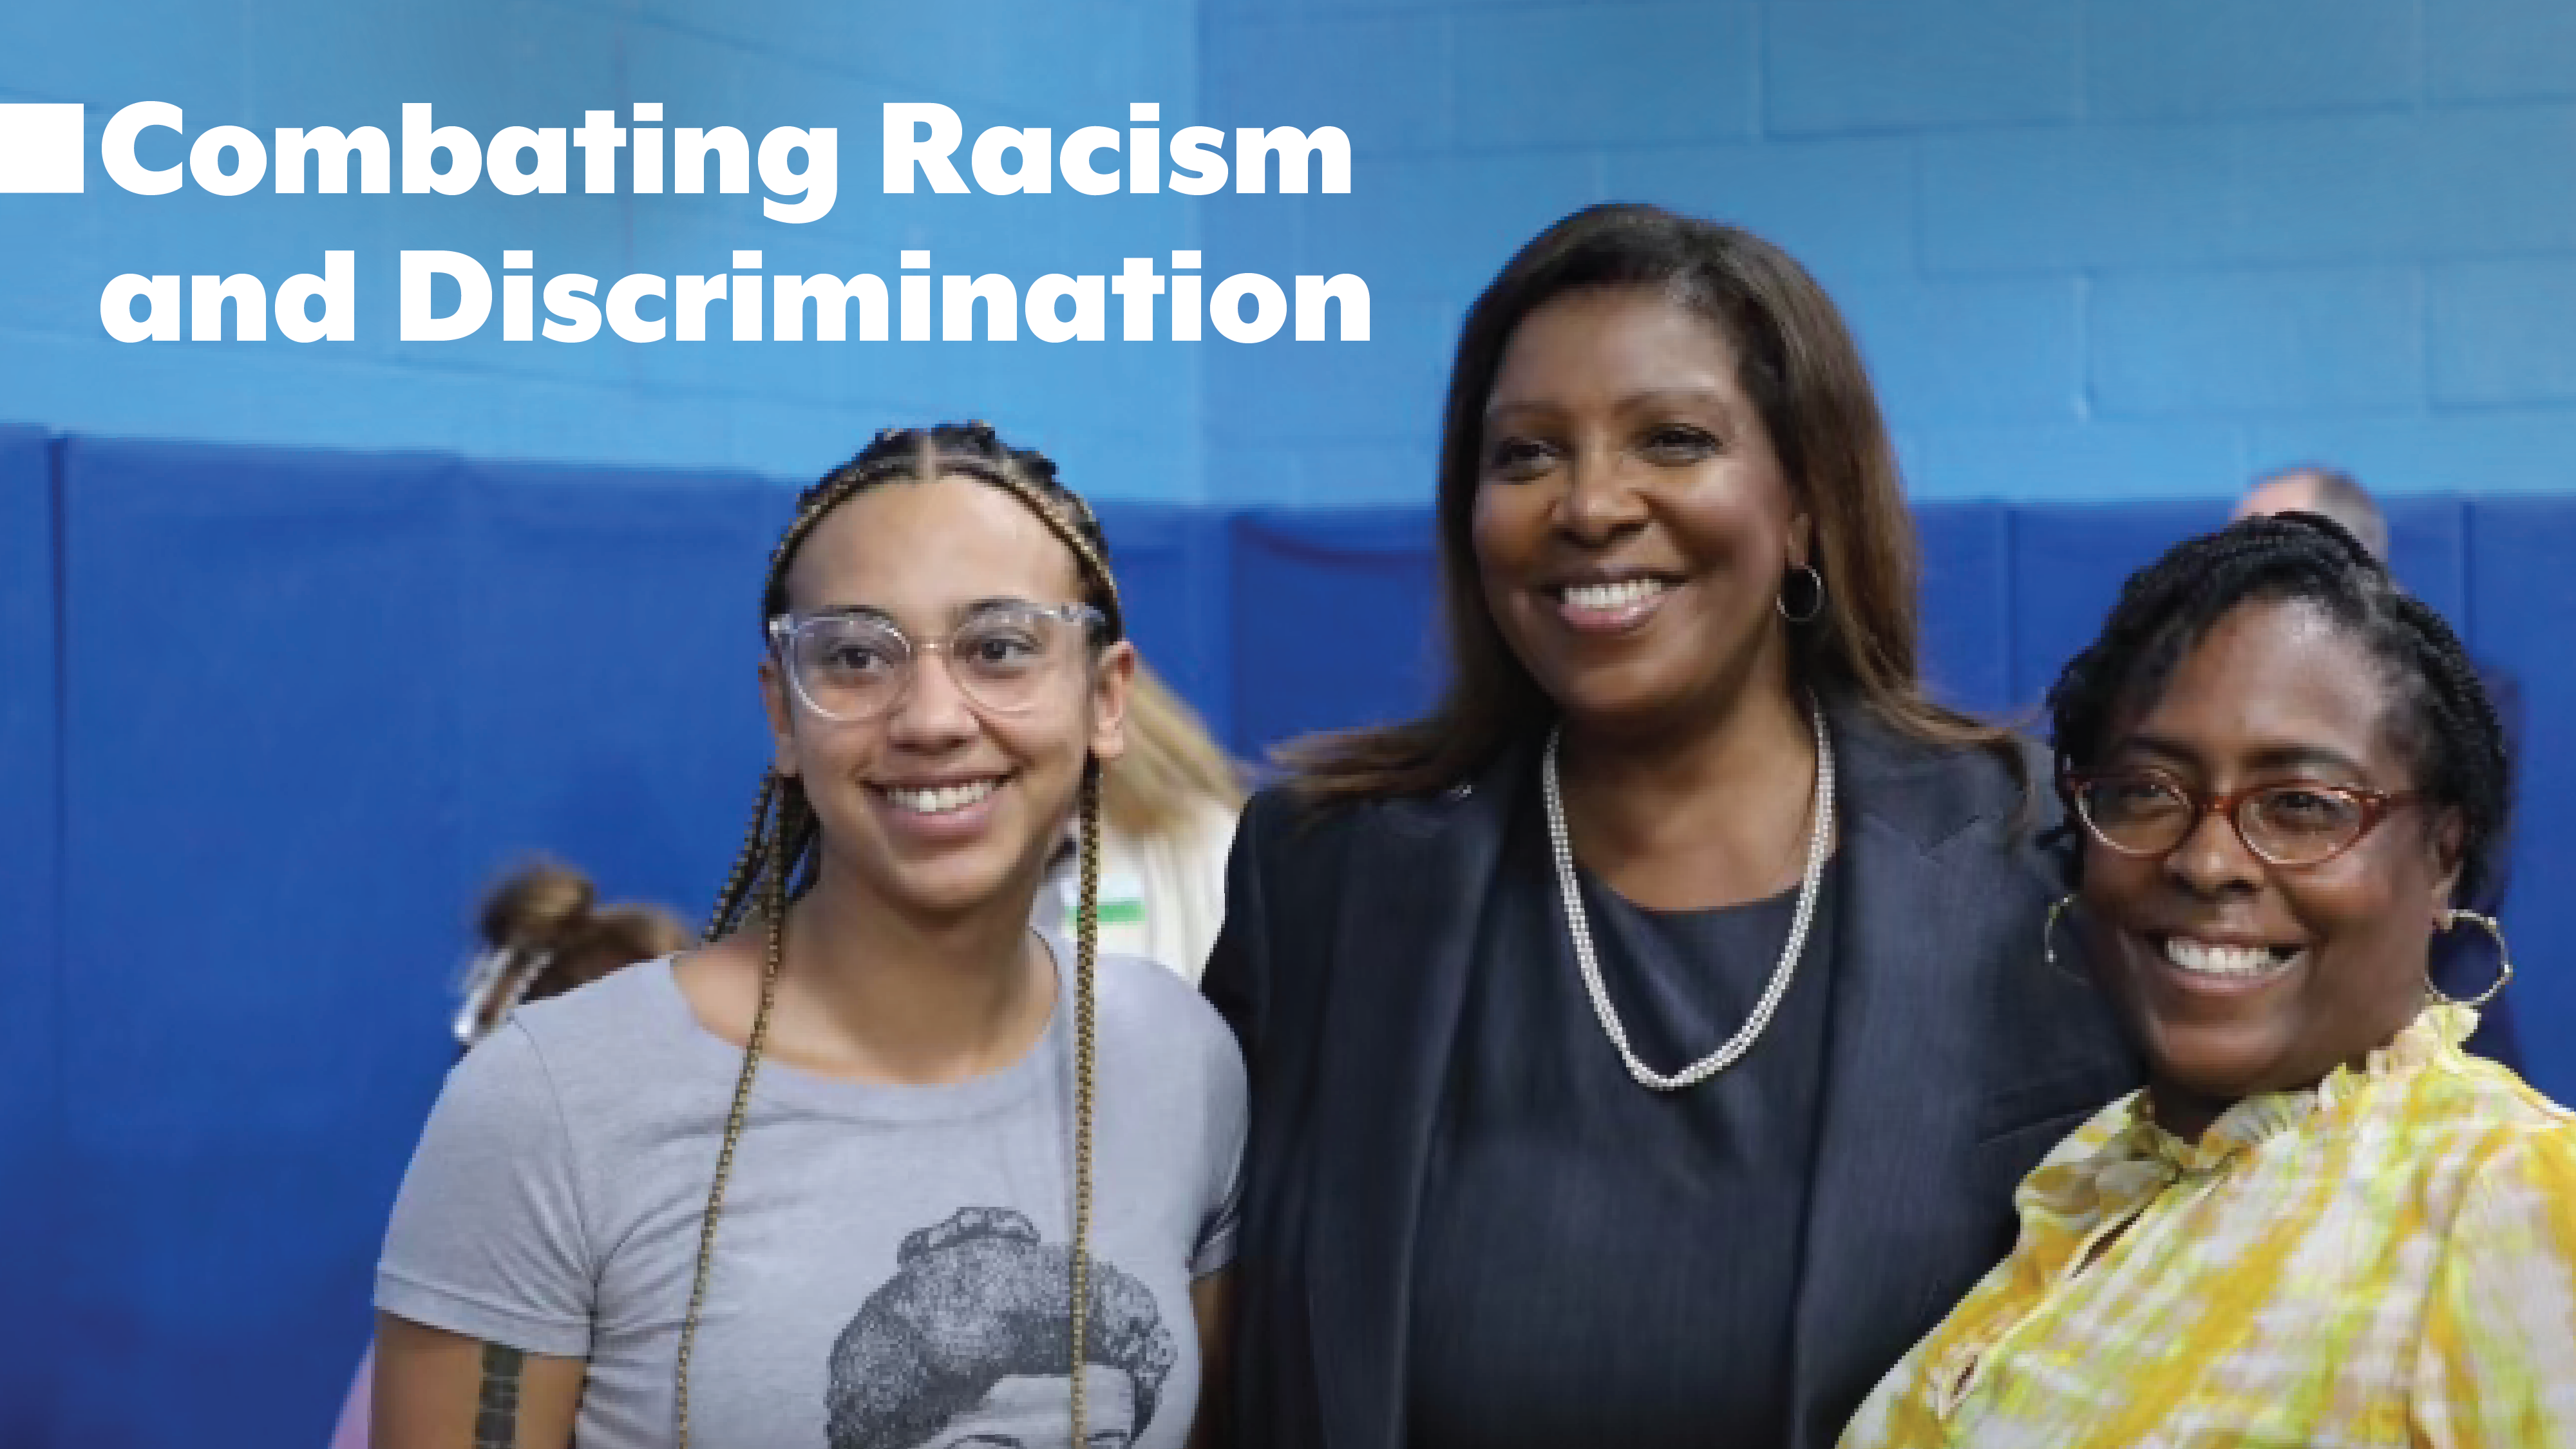 Combating Racism and Discrimination